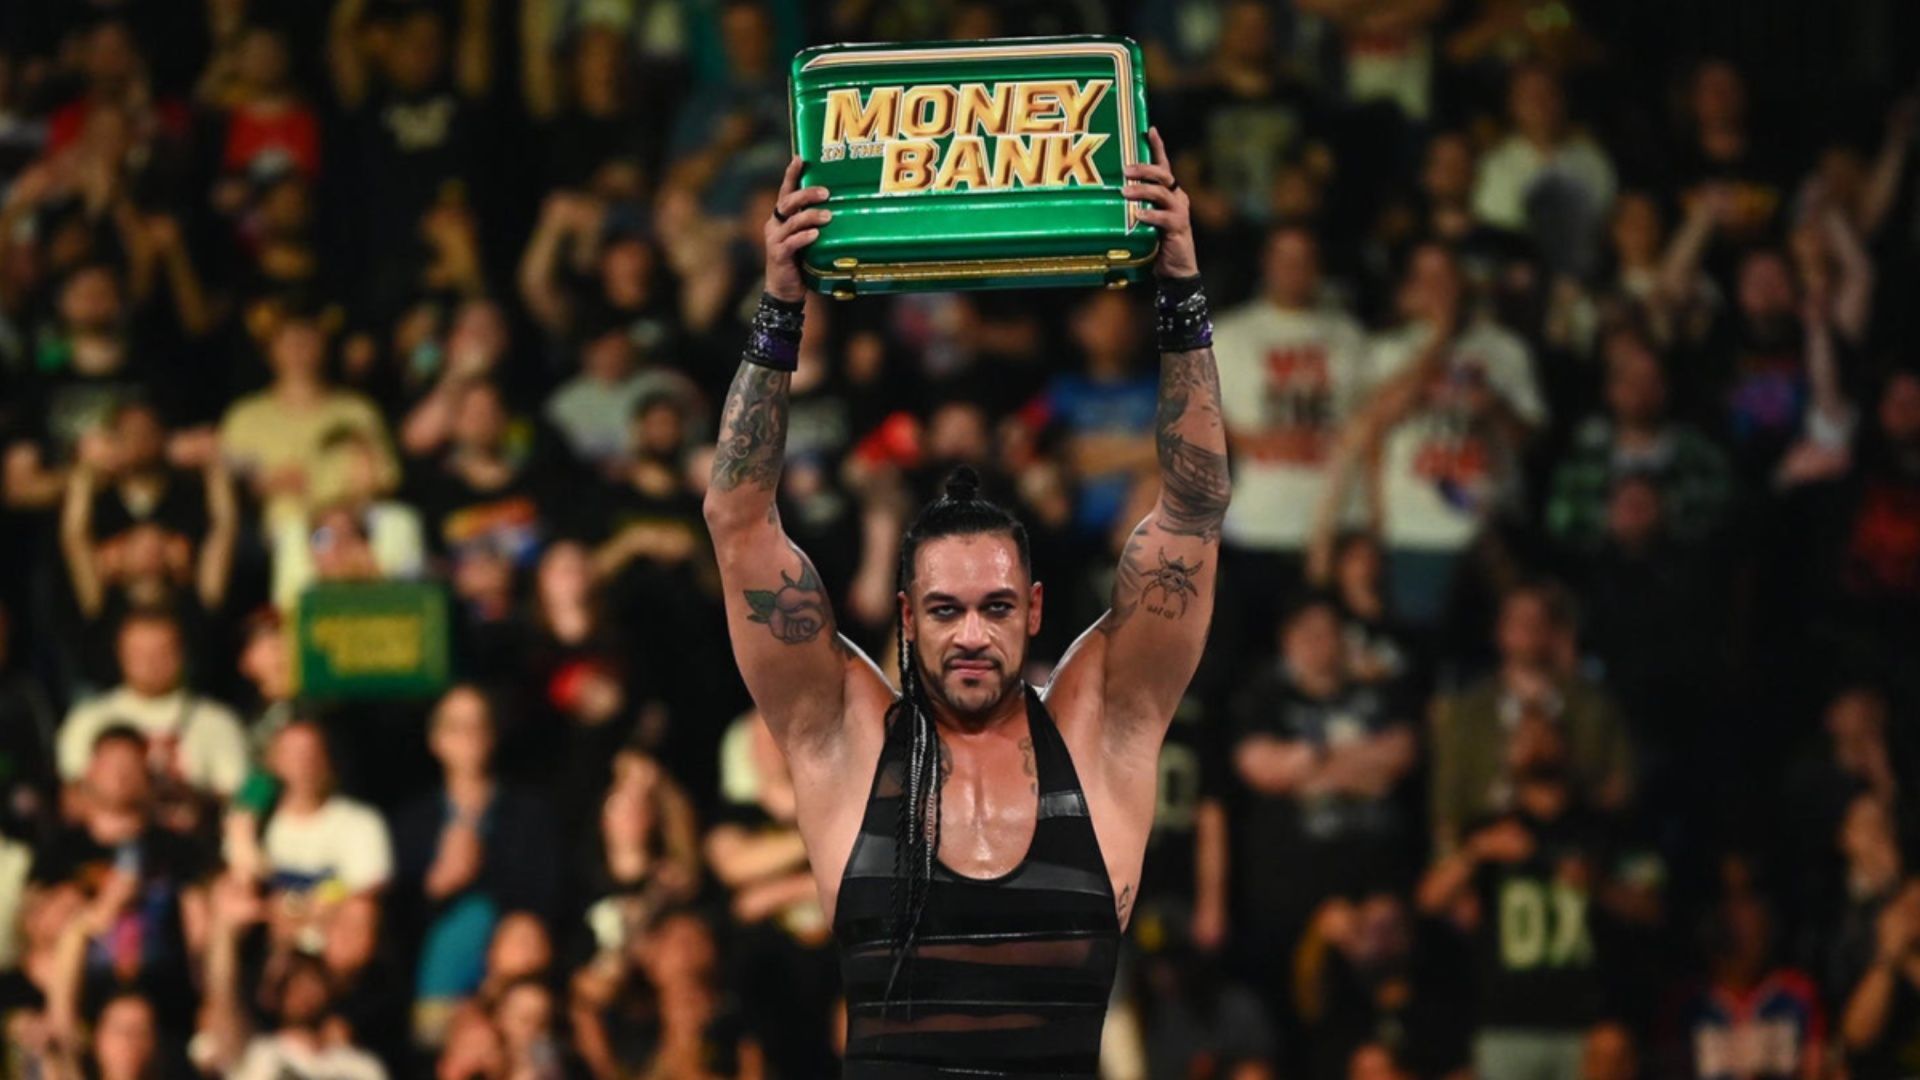 Damian Priest poses after winning Money in the Bank briefcase.